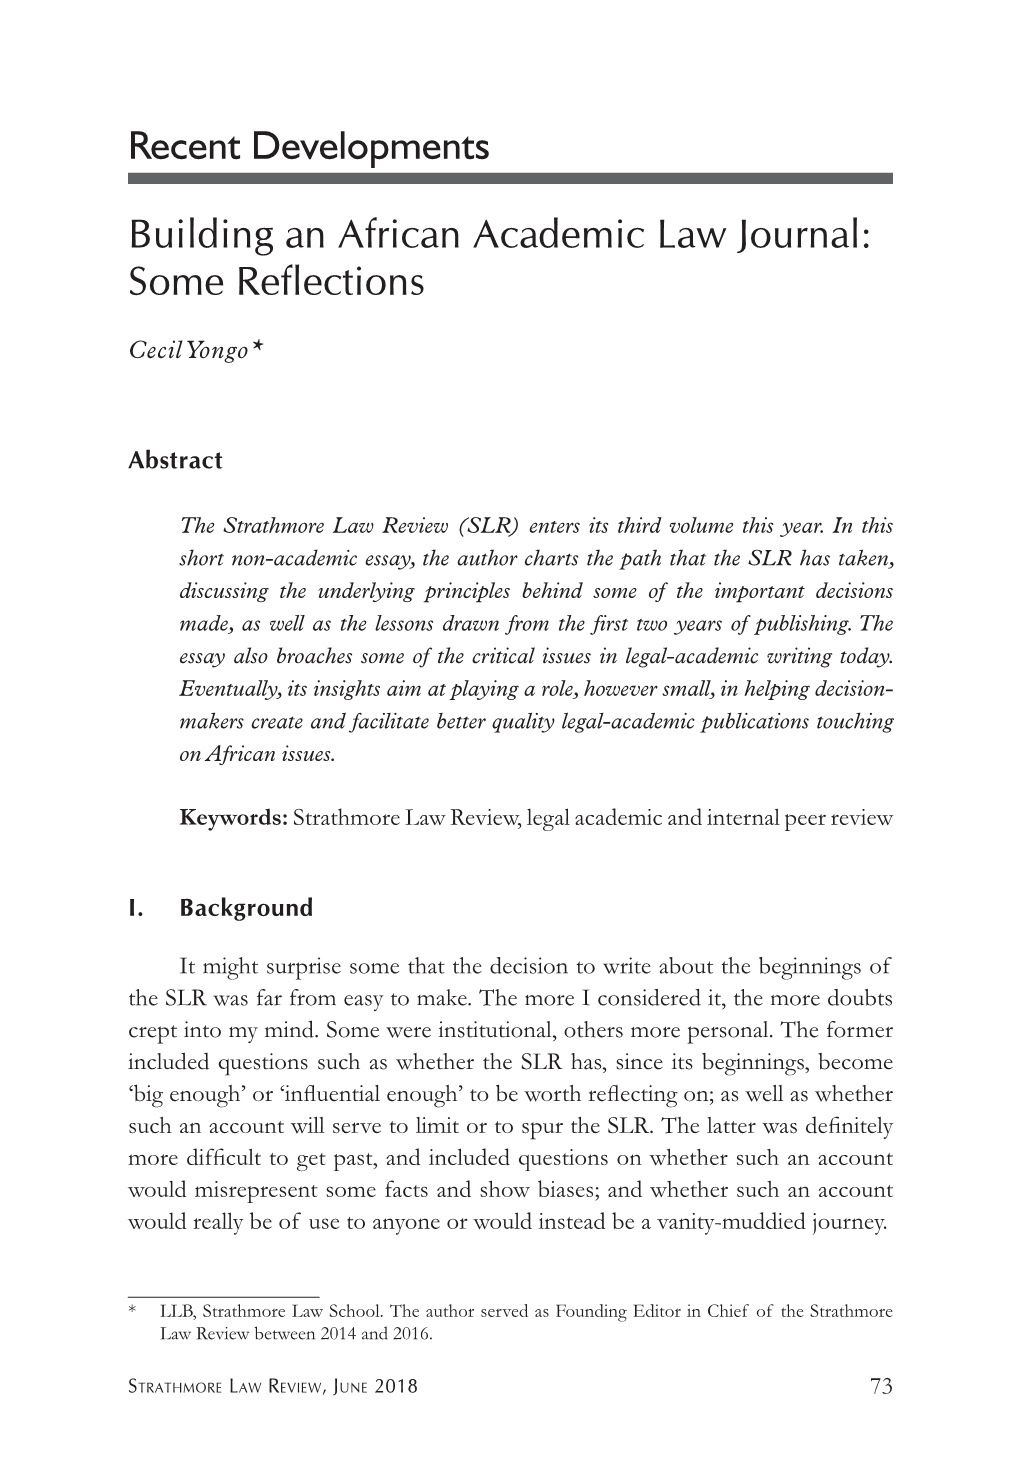 Building an African Academic Law Journal: Some Reflections